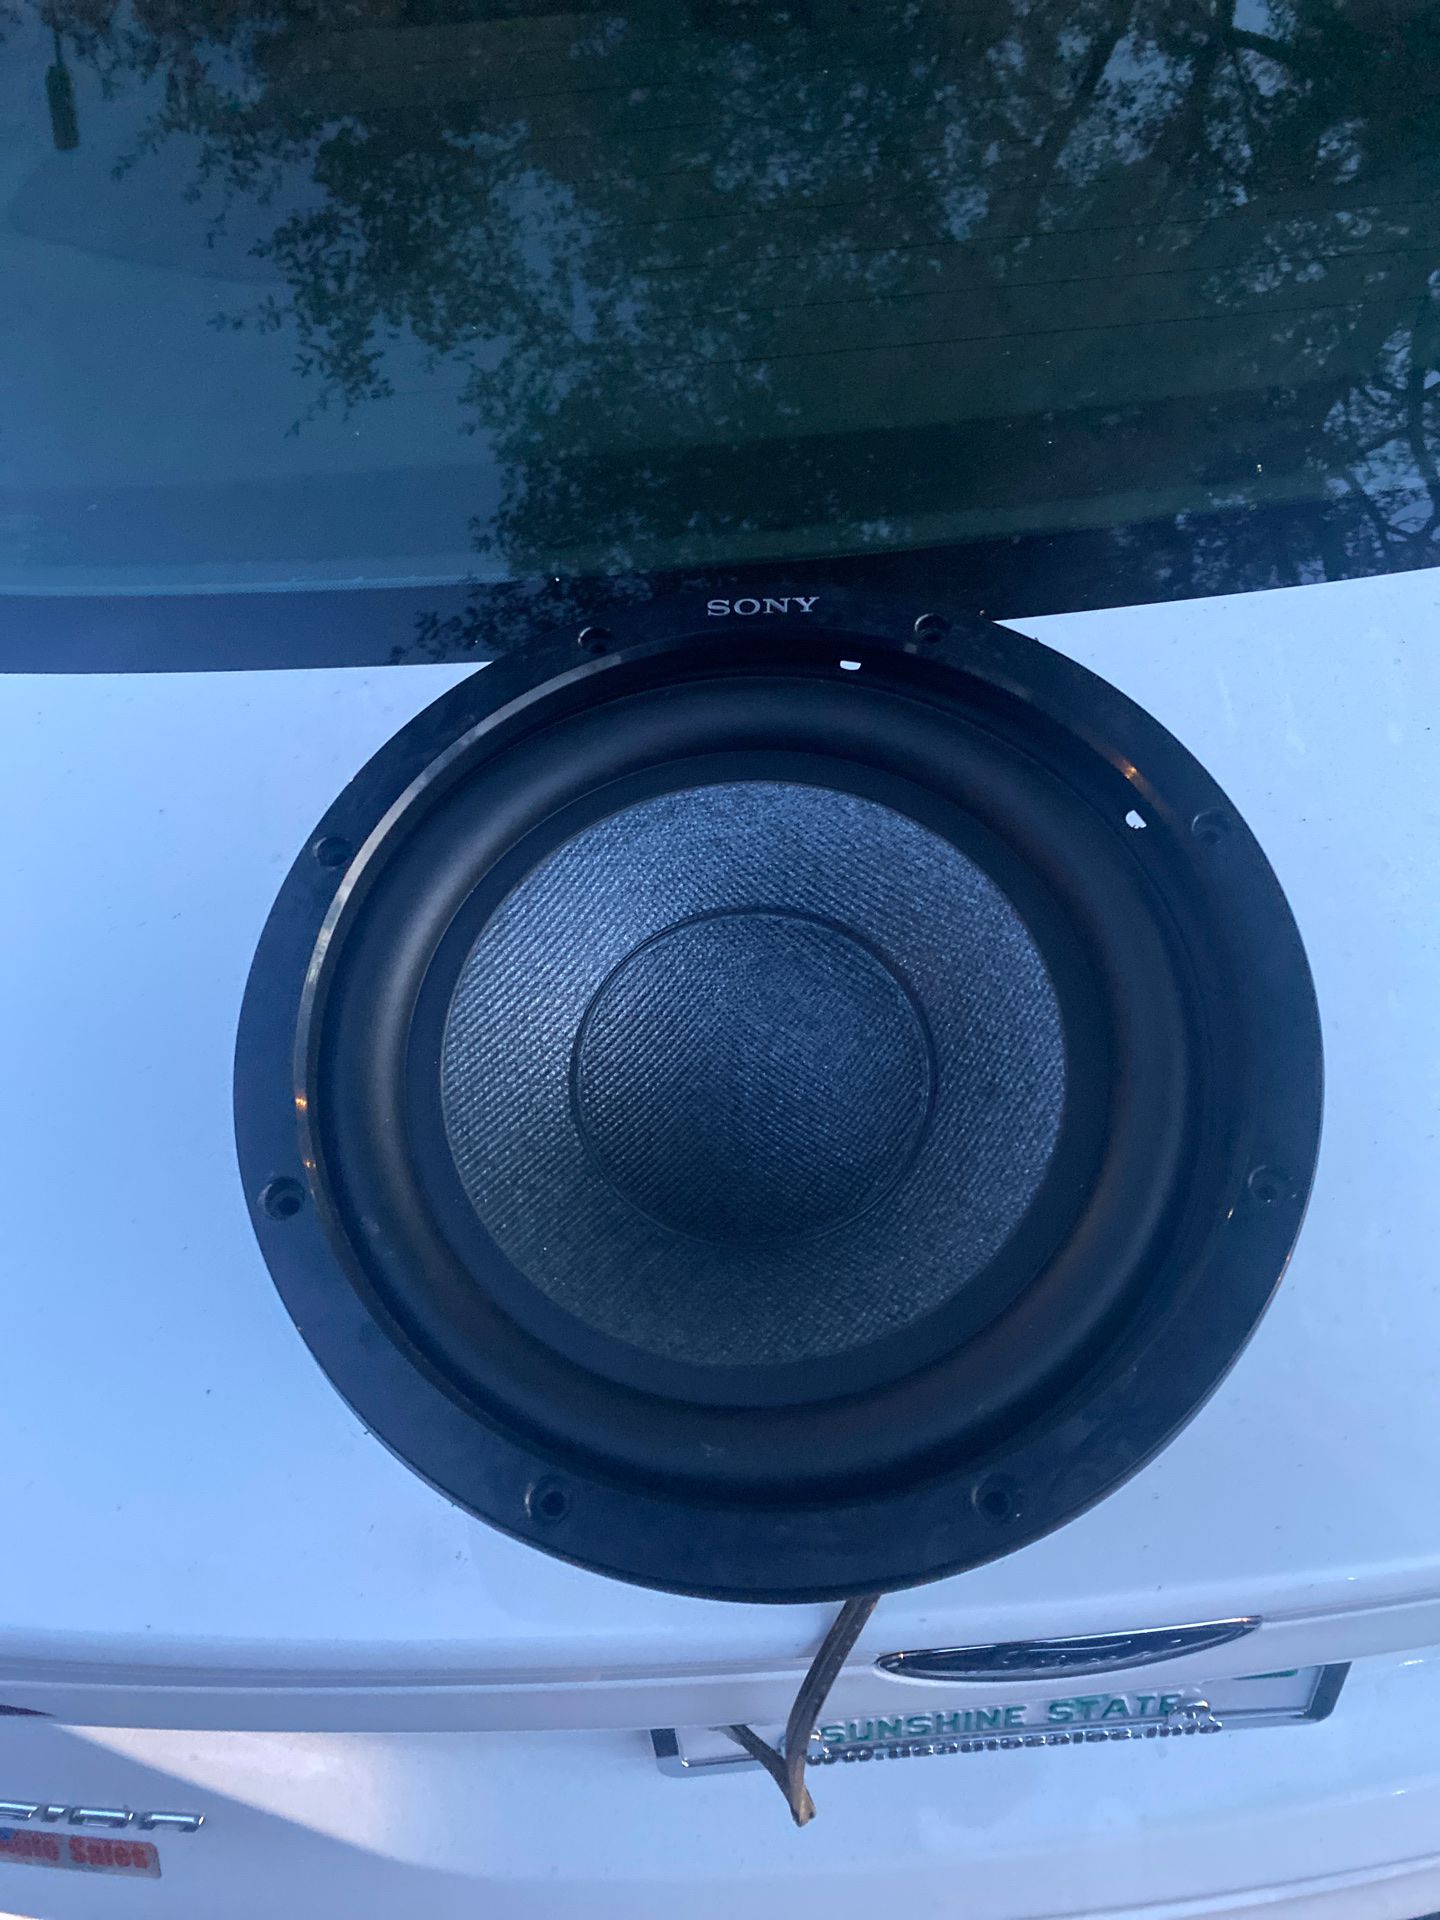 Sony 10” subwoofer works fine